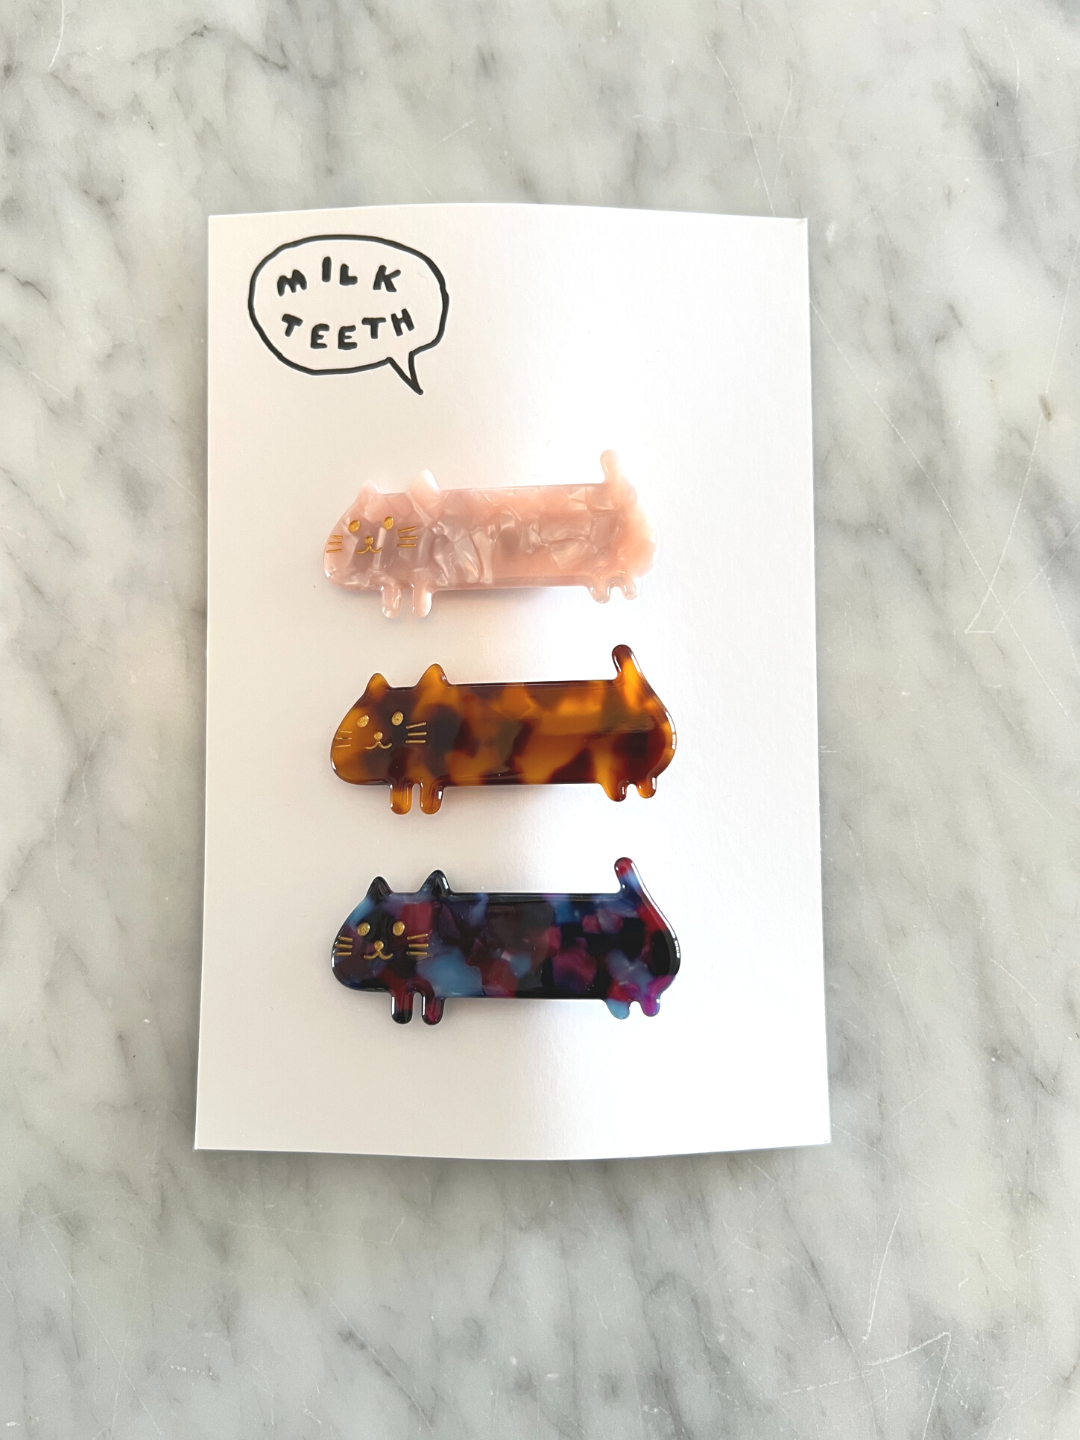 A Milk Teeth presentation card with three kids' barrettes in the shape of elongated cats: pink, ginger and purple